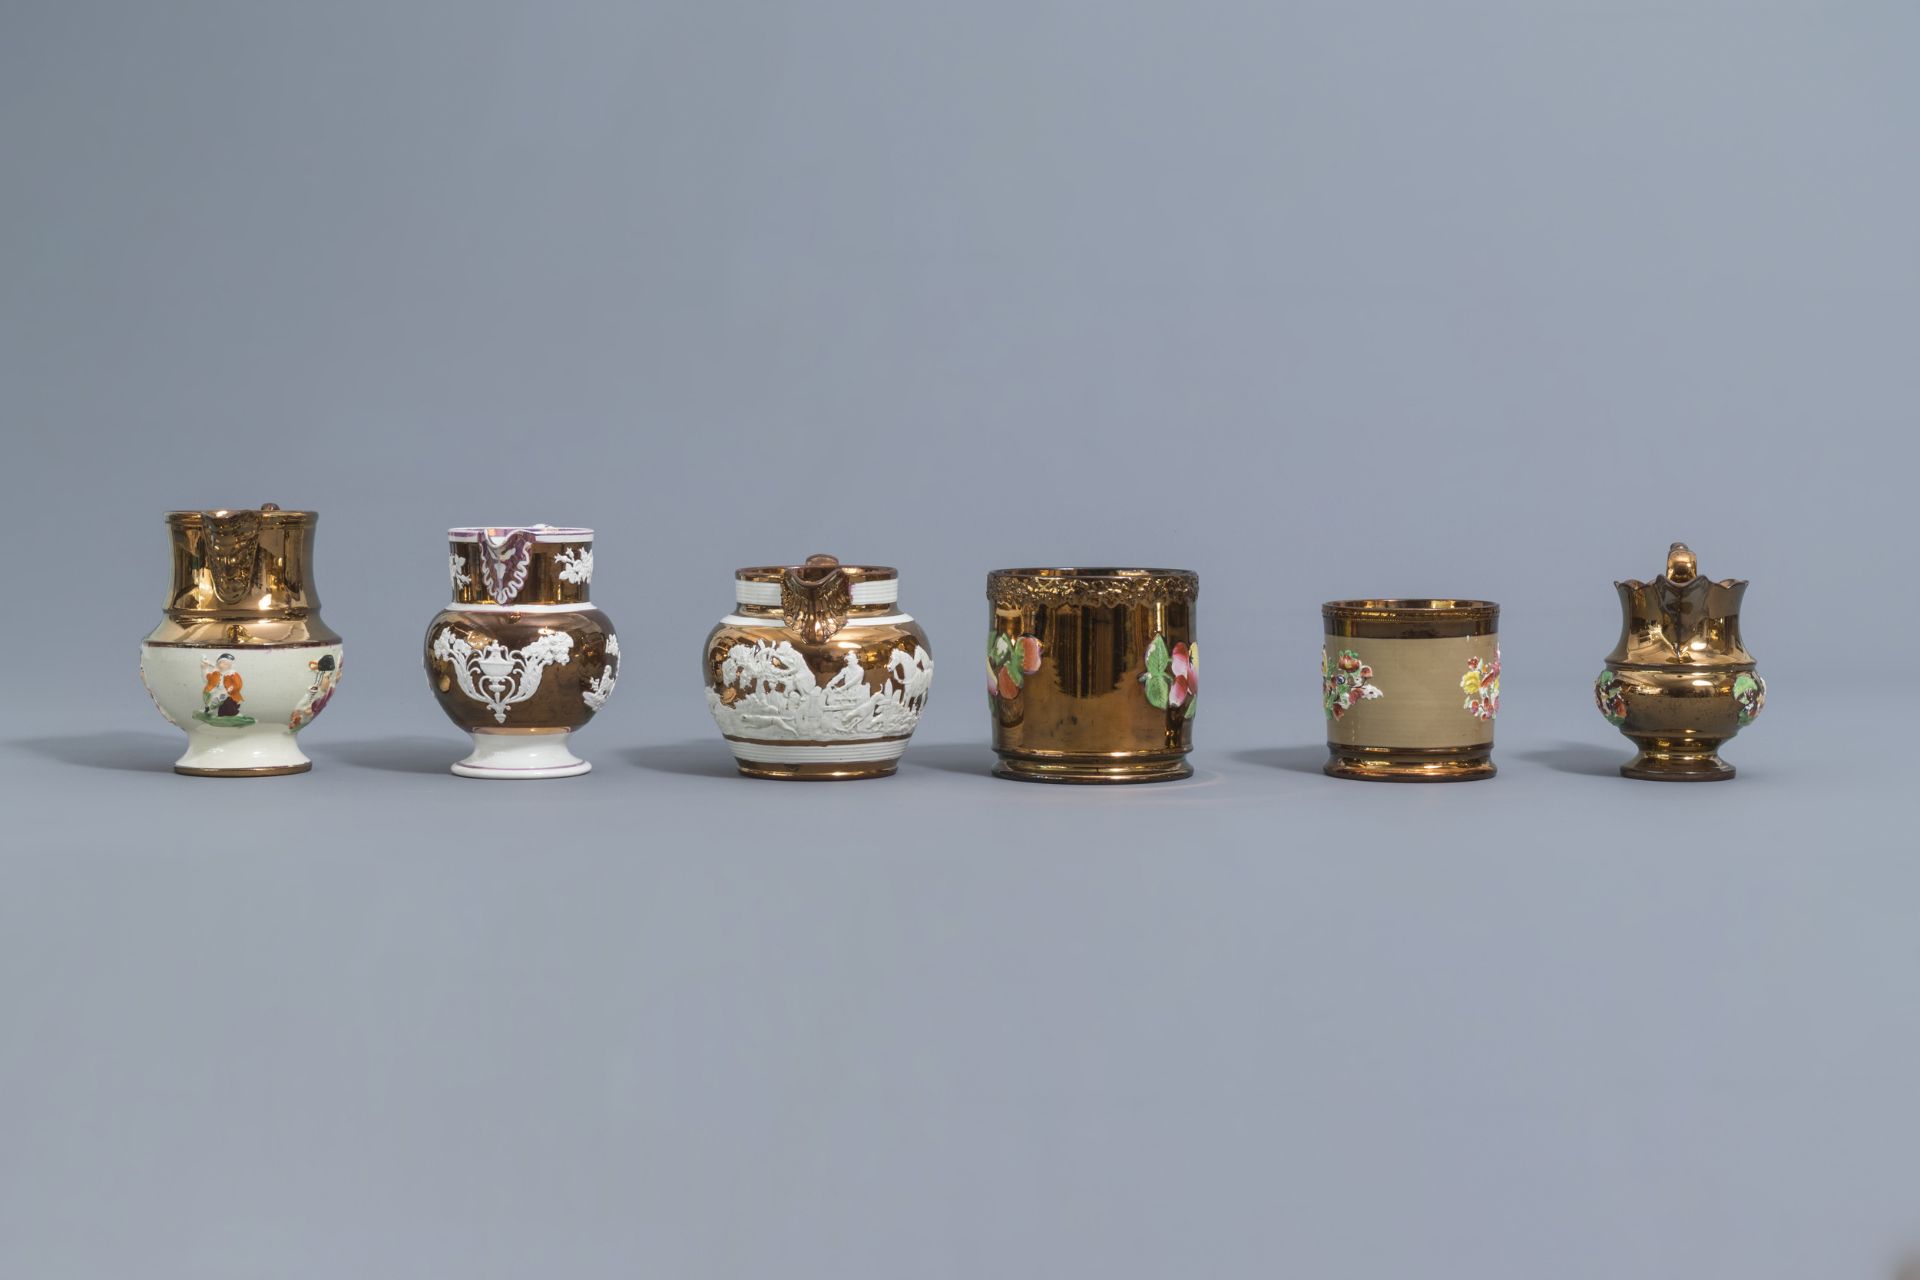 A varied collection of English lustreware items with relief design, 19th C. - Image 45 of 50